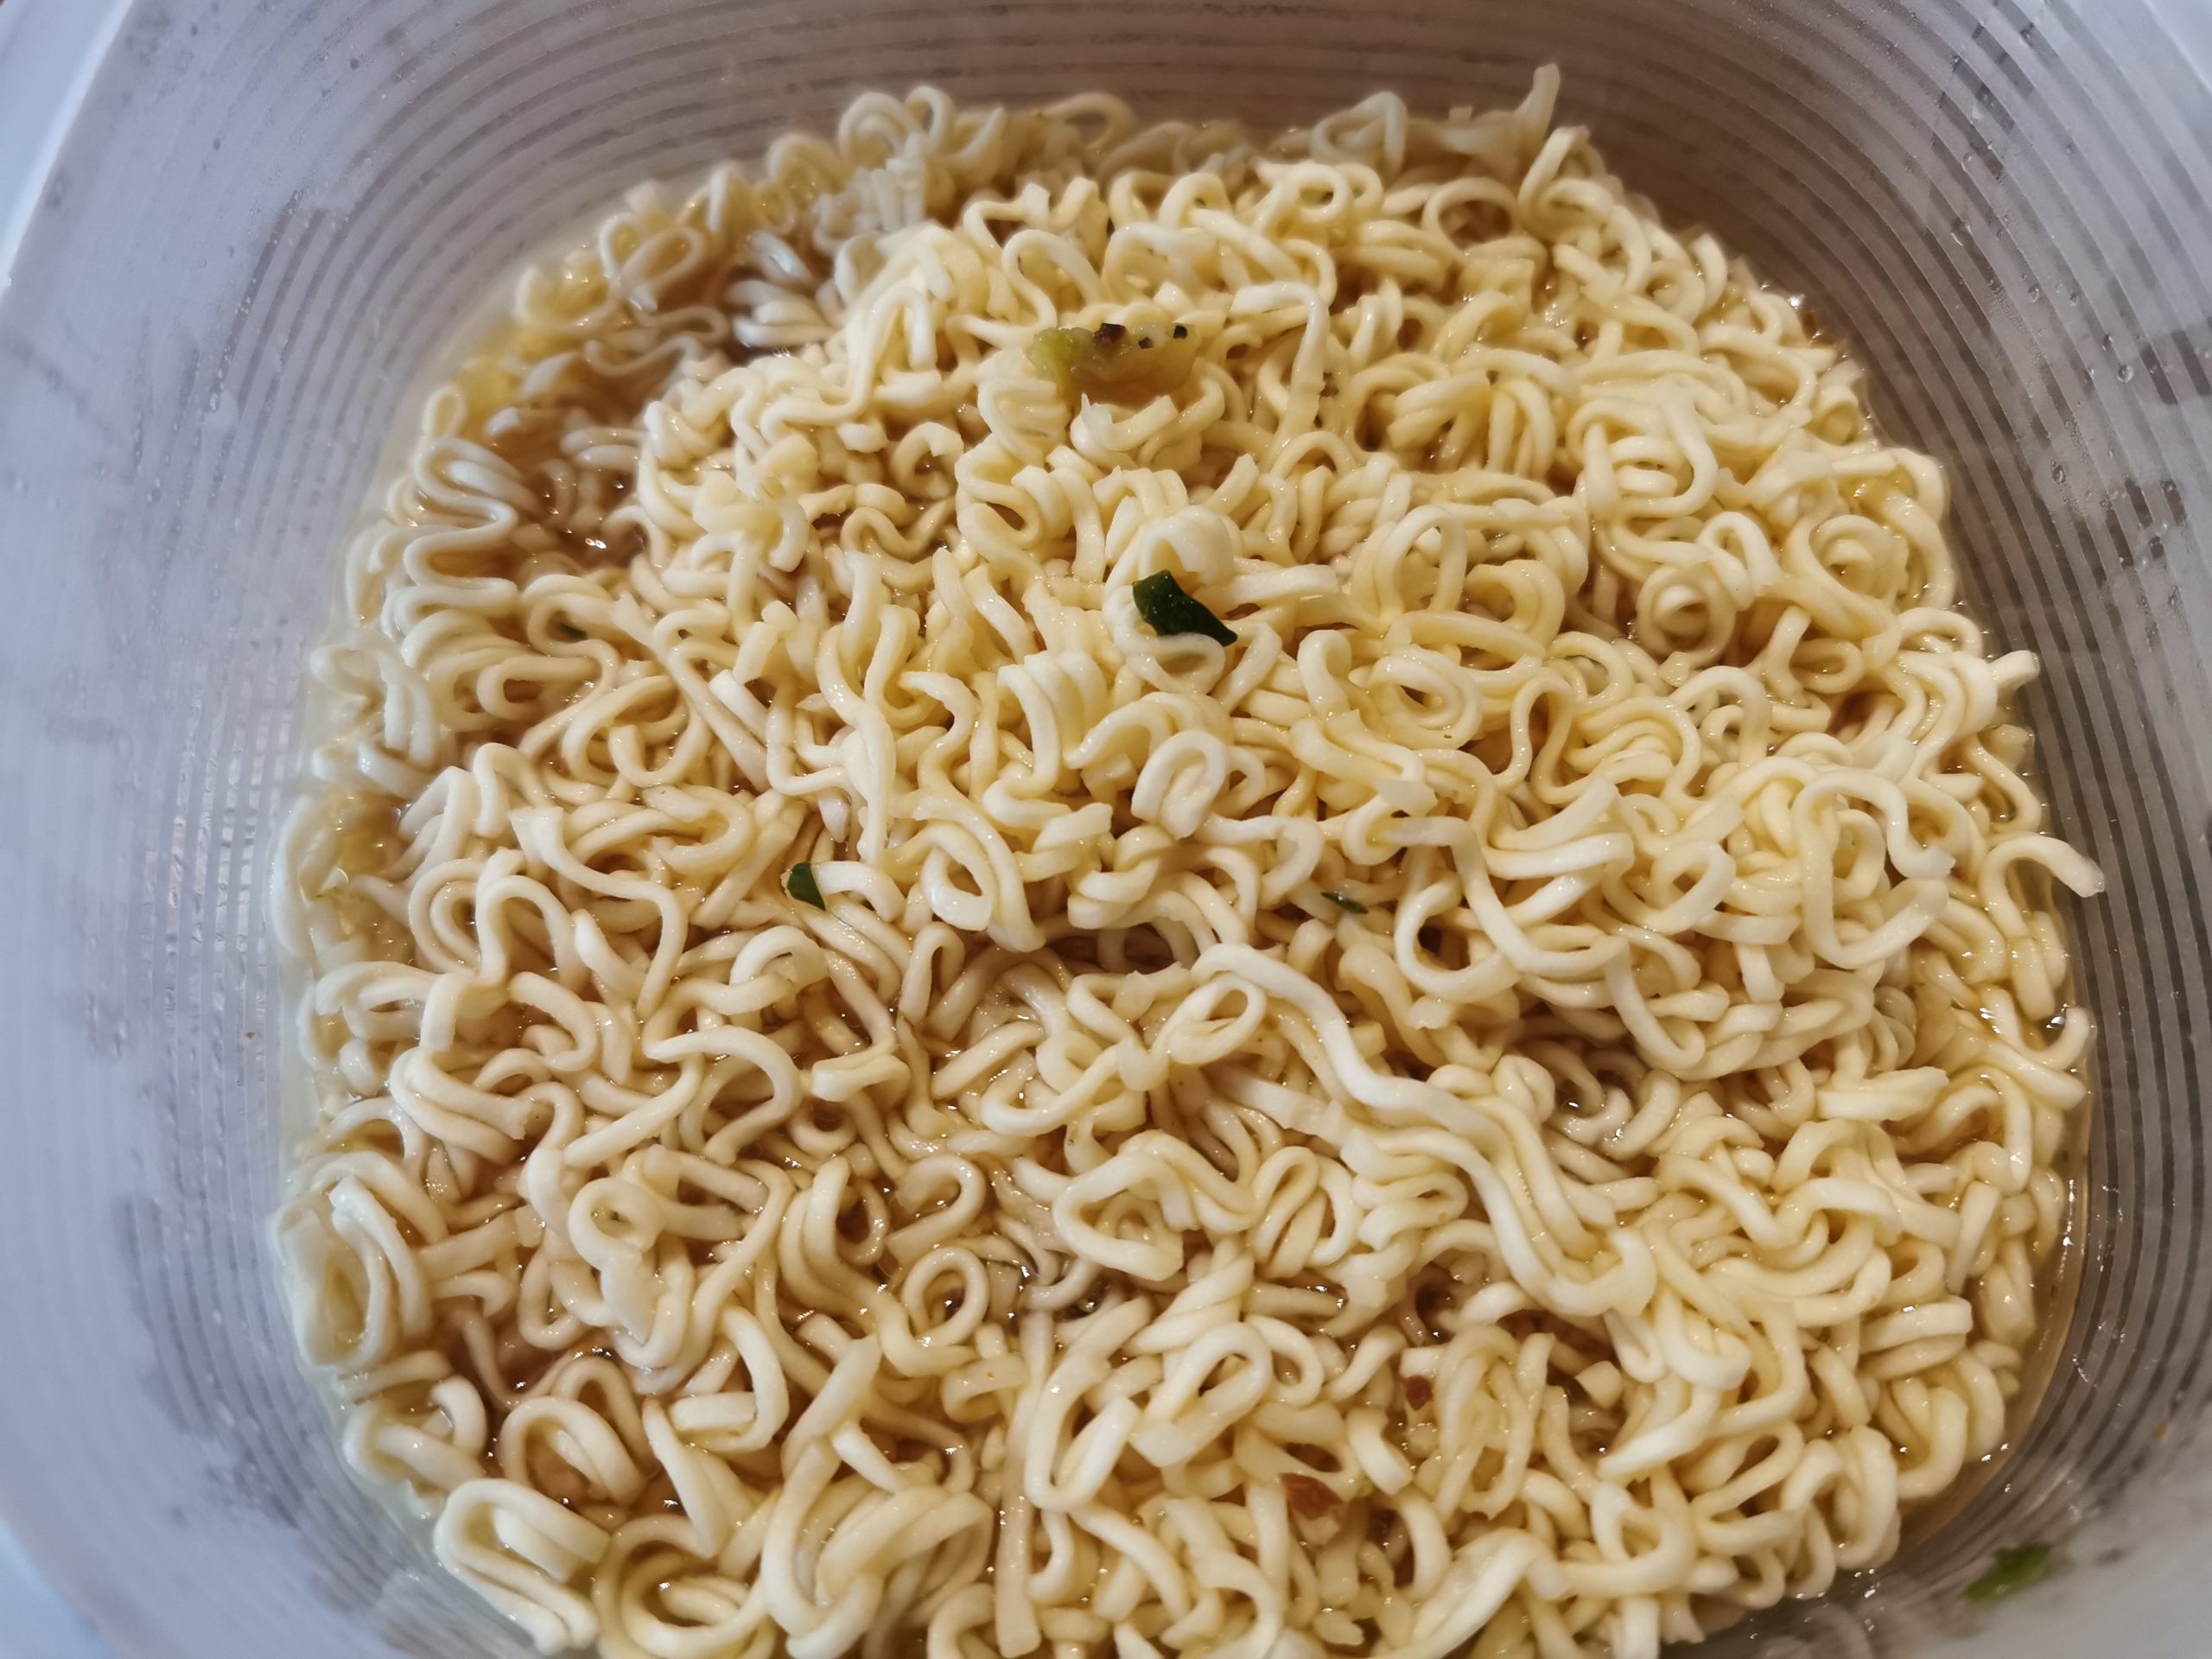 #1929: Wei Lih "Instant Noodles with Onion Flavour" (2021)